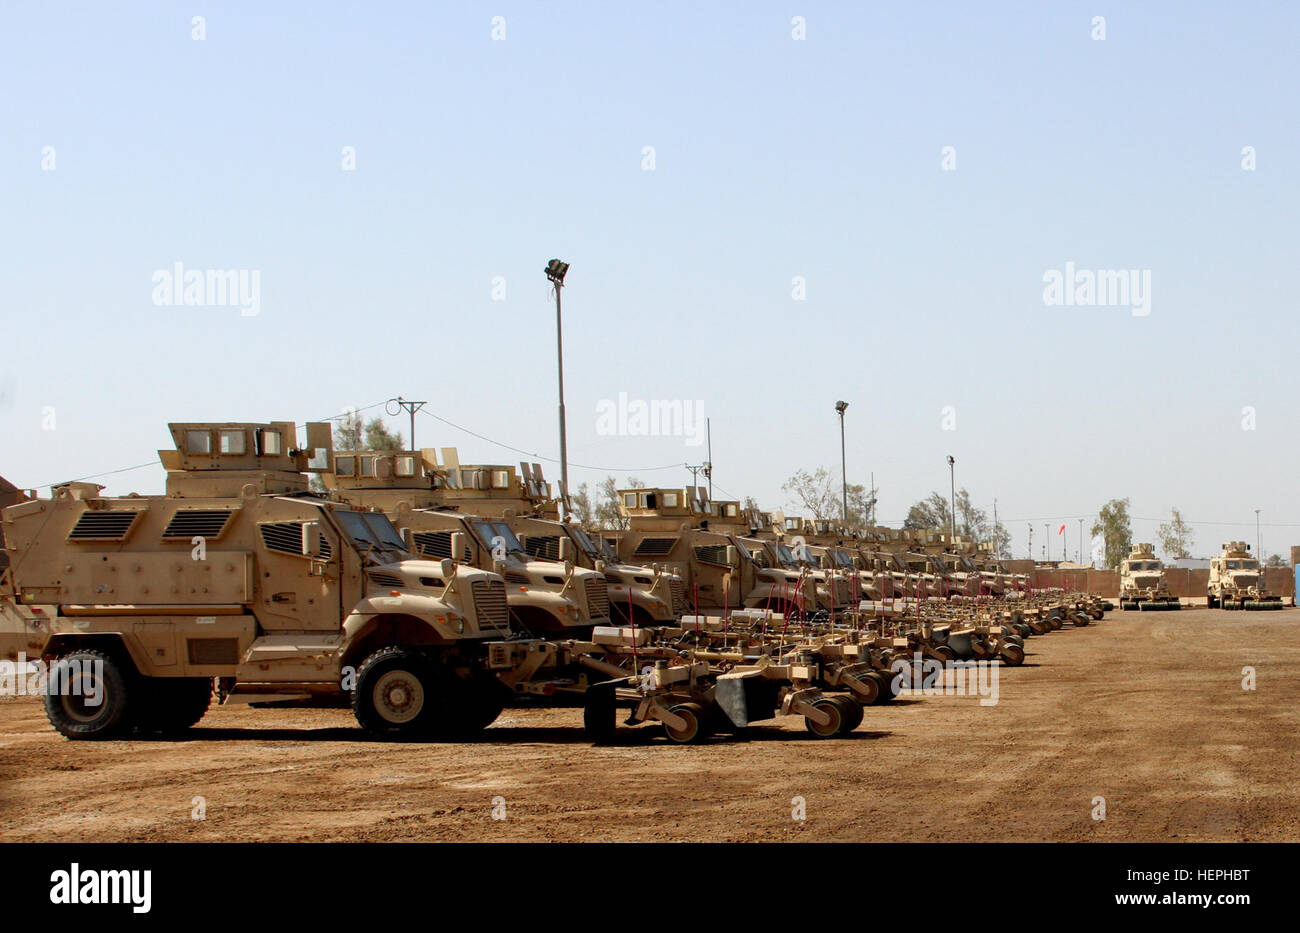 Iraqi security forces receive a shipment of 30 MaxxPro mine-resistant, ambush-protected (MRAP) vehicles with mine-roller attachments at Camp Taji, Iraq, July 13, 2015. The MRAPs are part of the Iraq Train and Equip Fund used to assist in the fight against the Islamic State of Iraq and the Levant. The 310th Advise and Assist Team, 13th Sustainment Command (Expeditionary) and the 1st Sustainment Command (Theater) supervised the delivery of the vehicles in support of Combined Joint Task Force – Operation Inherent Resolve. (U.S. Army photo by Staff Sgt. Brian McDermott/Released) Iraqi security for Stock Photo